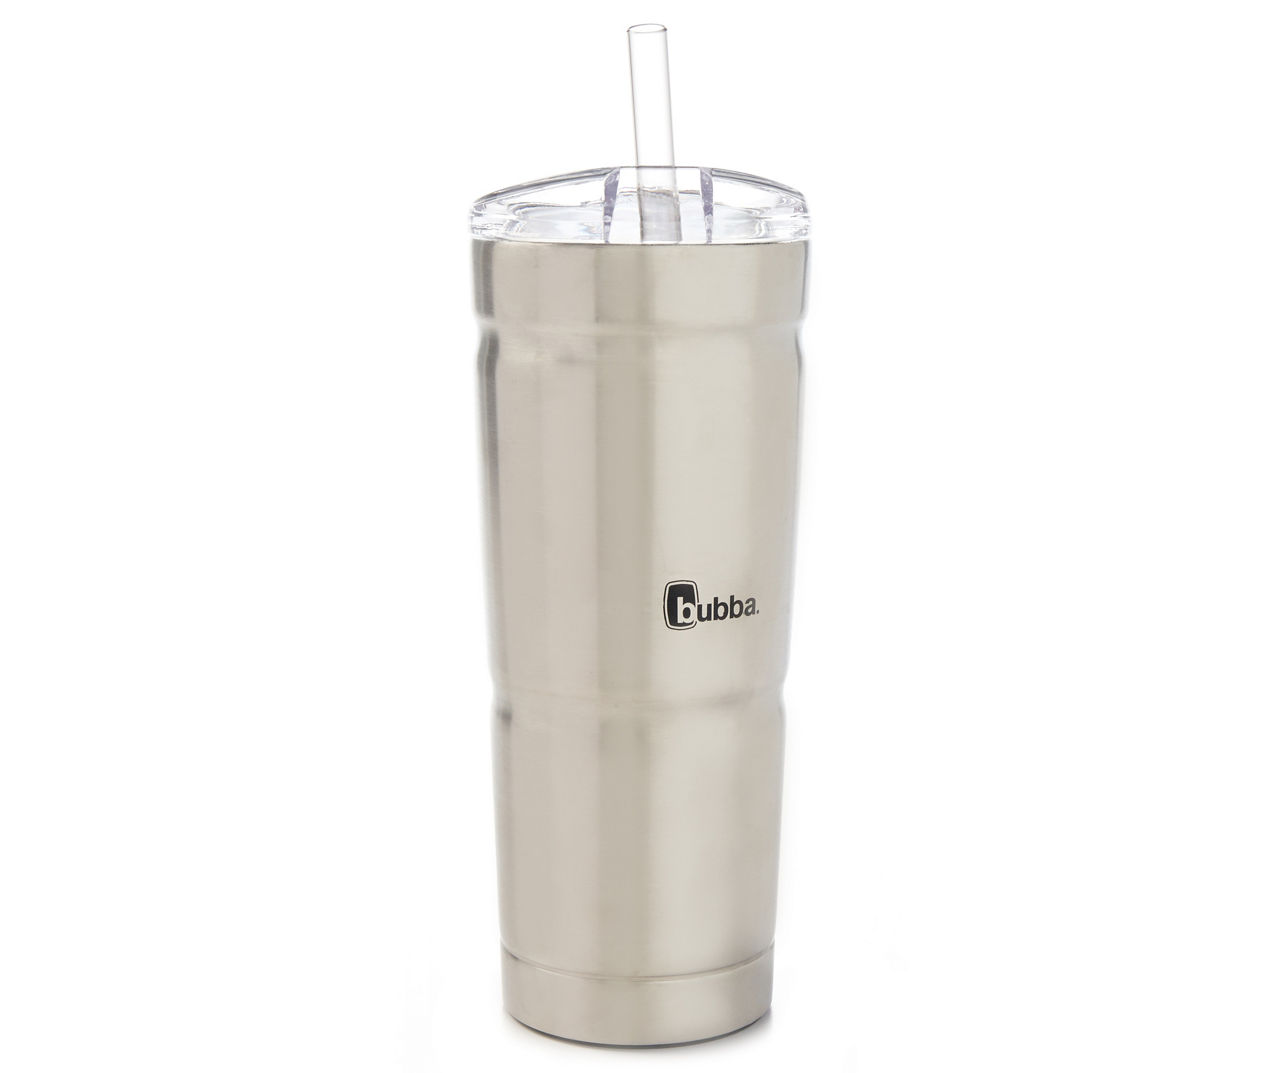 Bubba Envy Insulated Tumbler, Stainless Steel, 24-oz.